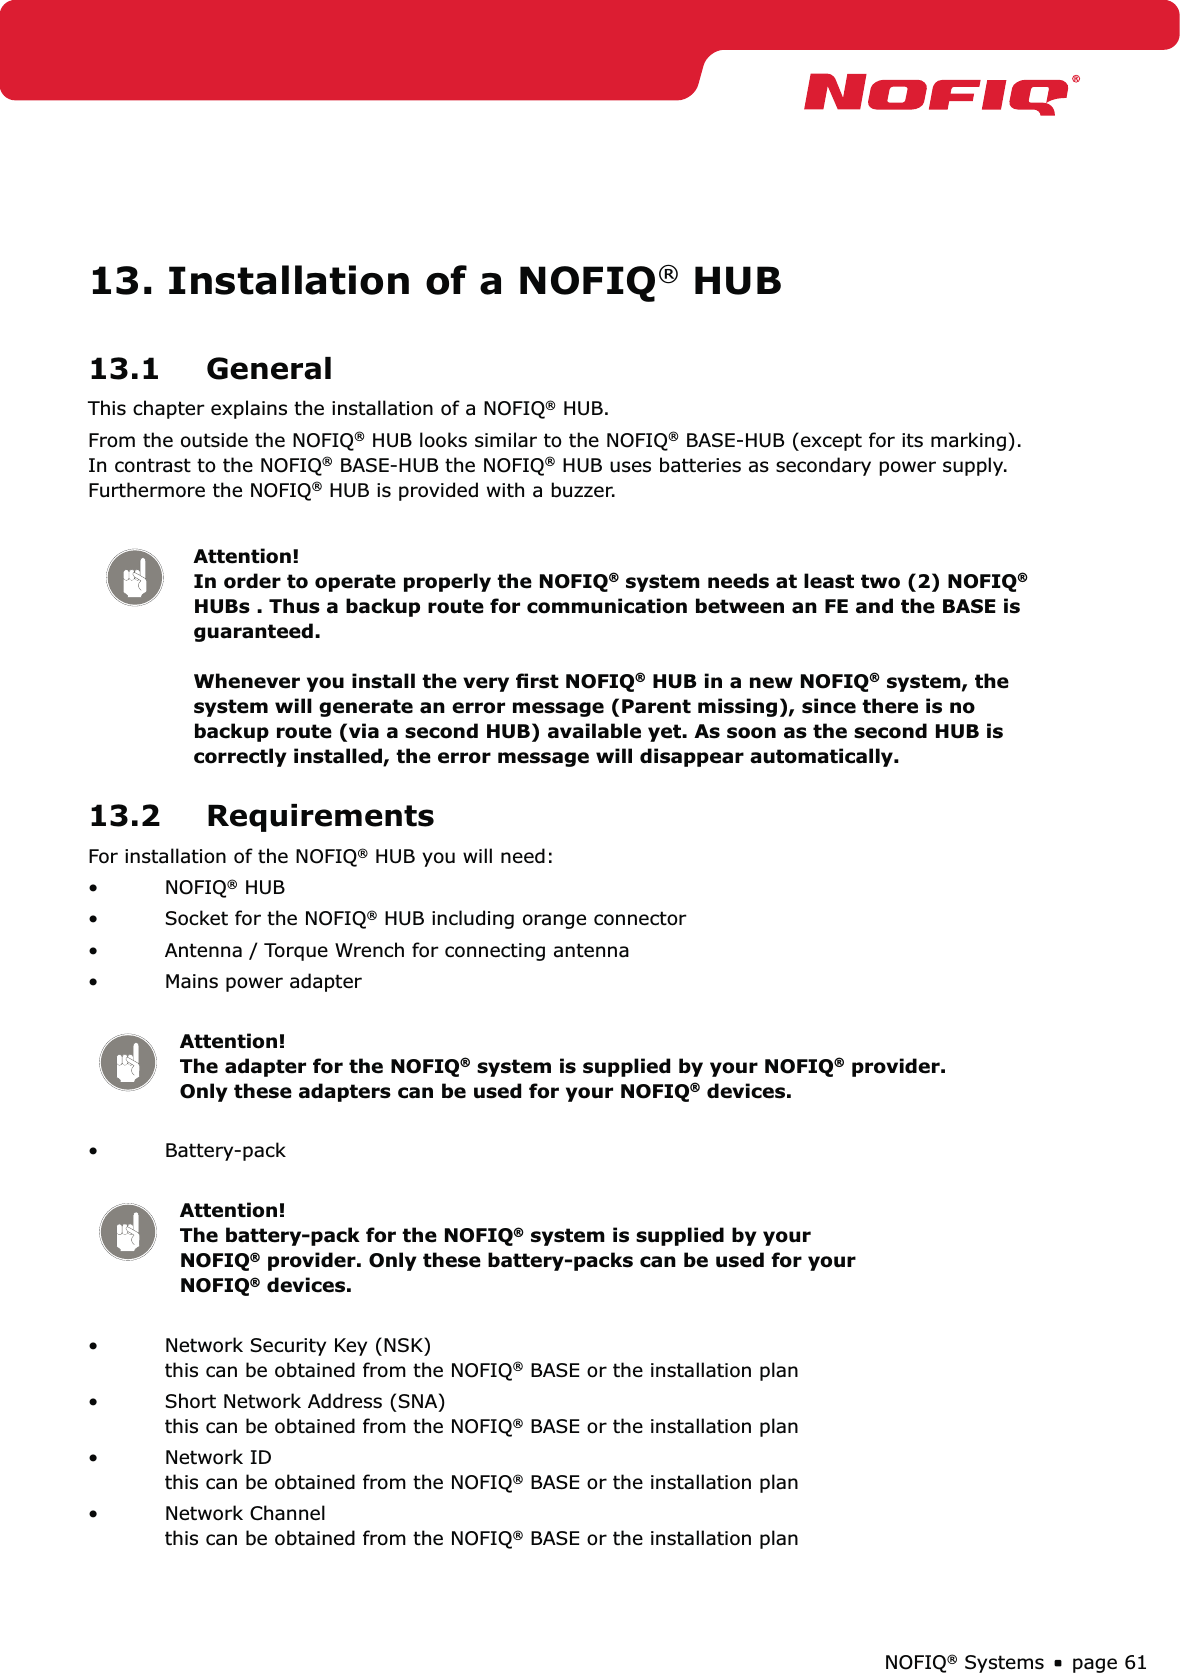 page 61NOFIQ® Systems13. Installation of a NOFIQ® HUB13.1 GeneralThis chapter explains the installation of a NOFIQ® HUB.From the outside the NOFIQ® HUB looks similar to the NOFIQ® BASE-HUB (except for its marking). In contrast to the NOFIQ® BASE-HUB the NOFIQ® HUB uses batteries as secondary power supply. Furthermore the NOFIQ® HUB is provided with a buzzer.Attention! In order to operate properly the NOFIQ® system needs at least two (2) NOFIQ® HUBs . Thus a backup route for communication between an FE and the BASE is guaranteed.  Whenever you install the very ﬁrst NOFIQ® HUB in a new NOFIQ® system, the system will generate an error message (Parent missing), since there is no backup route (via a second HUB) available yet. As soon as the second HUB is correctly installed, the error message will disappear automatically.13.2 RequirementsFor installation of the NOFIQ® HUB you will need:NOFIQ•  ® HUBSocket for the NOFIQ•  ® HUB including orange connectorAntenna / Torque Wrench for connecting antenna• Mains power adapter • Attention!   The adapter for the NOFIQ® system is supplied by your NOFIQ® provider. Only these adapters can be used for your NOFIQ® devices.Battery-pack  • Attention!   The battery-pack for the NOFIQ® system is supplied by your NOFIQ® provider. Only these battery-packs can be used for your NOFIQ® devices.Network Security Key (NSK)  • this can be obtained from the NOFIQ® BASE or the installation planShort Network Address (SNA) • this can be obtained from the NOFIQ® BASE or the installation planNetwork ID • this can be obtained from the NOFIQ® BASE or the installation planNetwork Channel • this can be obtained from the NOFIQ® BASE or the installation plan